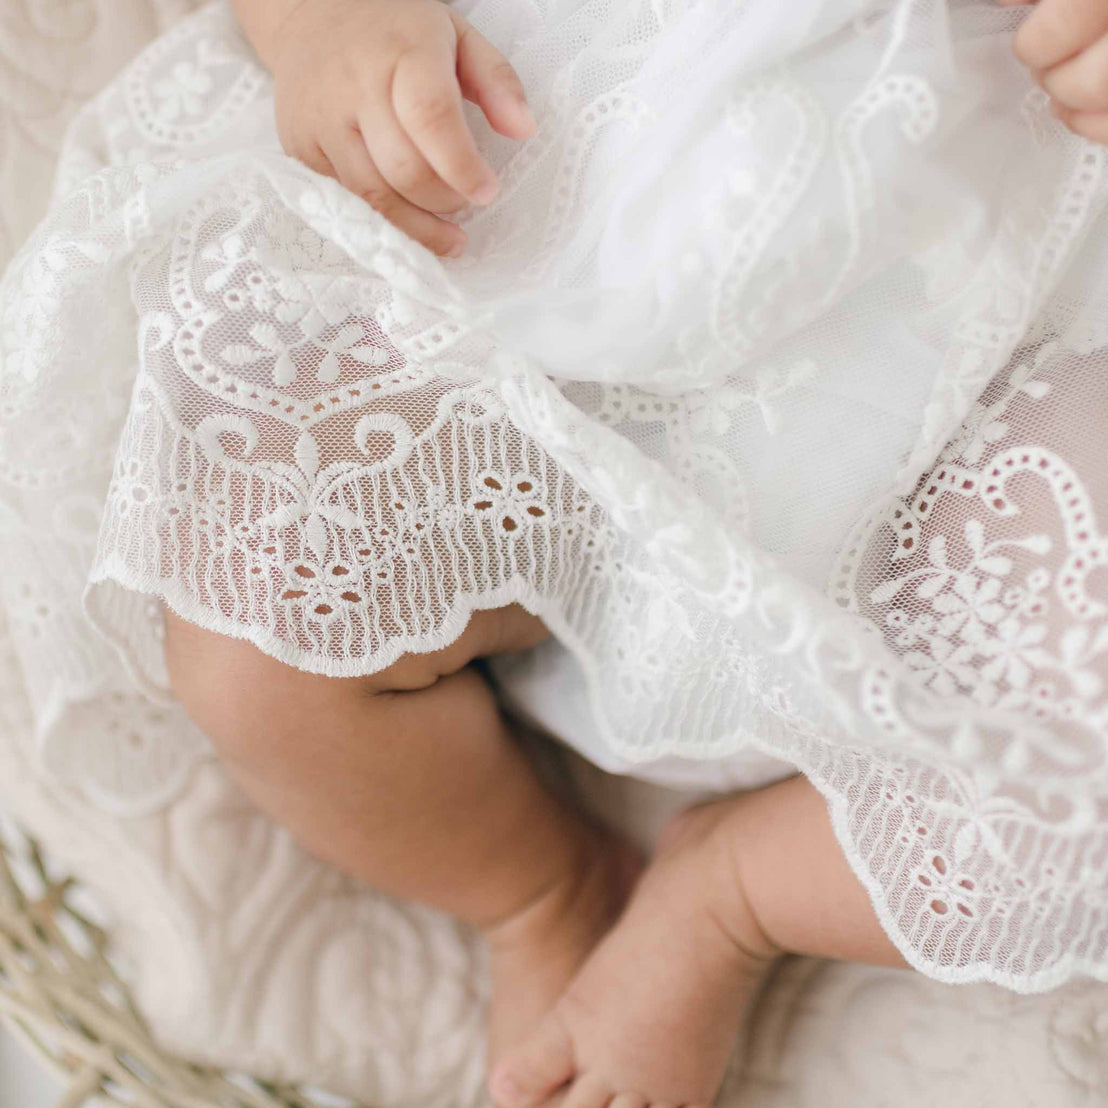 A close-up image of a baby wearing an Eliza Lace Dress & Headband. The baby's small hands are visible gently holding the fabric, and the baby's legs are also partially seen, with tiny feet peeking out from under the dress. The background is soft and neutral.